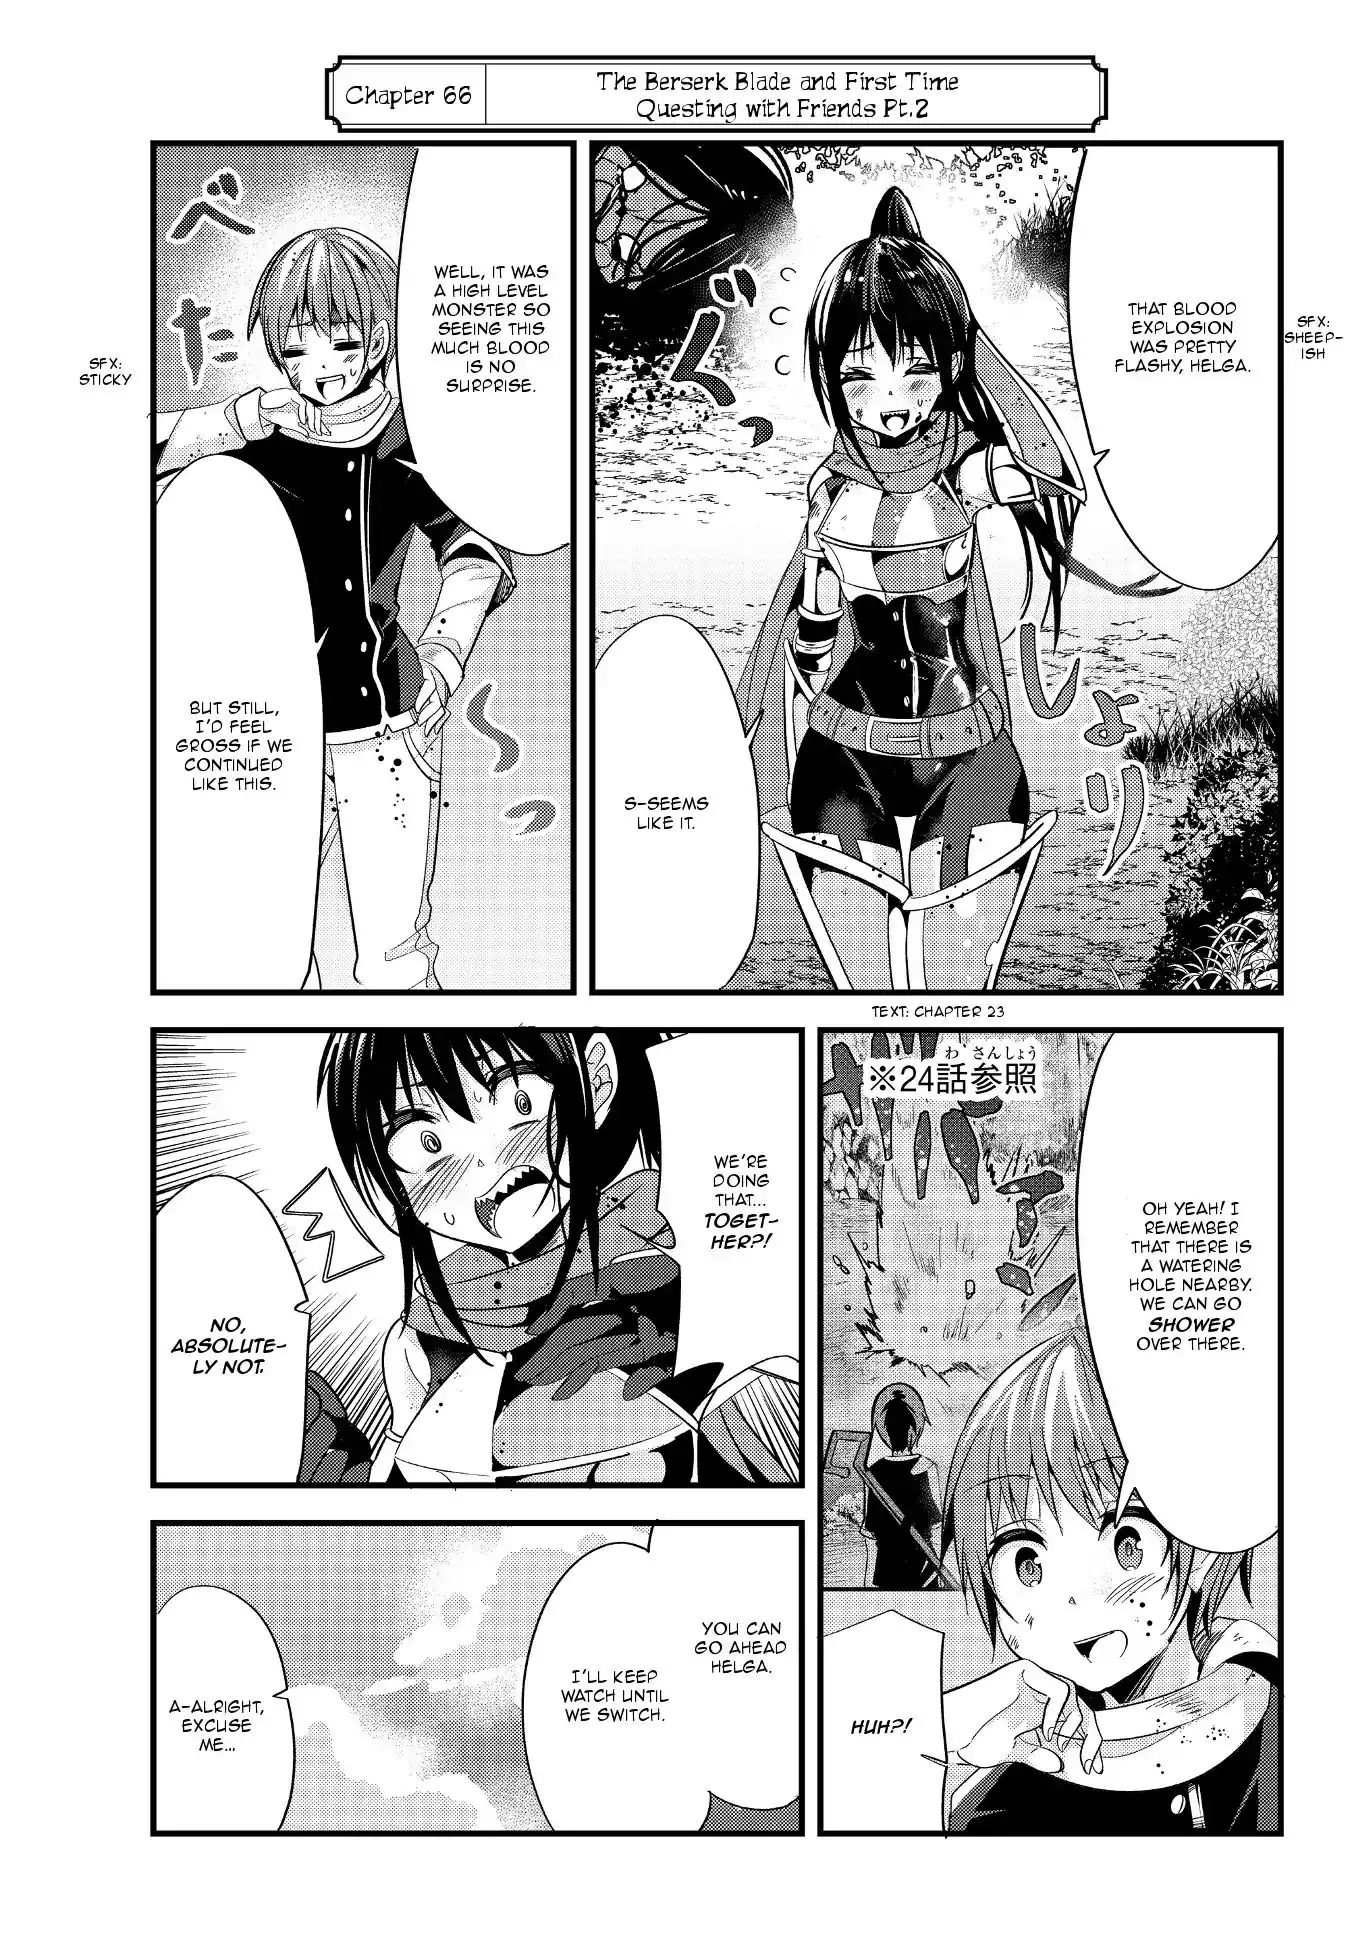 A Story About Treating a Female Knight, Who Has Never Been Treated as a Woman, as a Woman - Chapter 67 Page 1